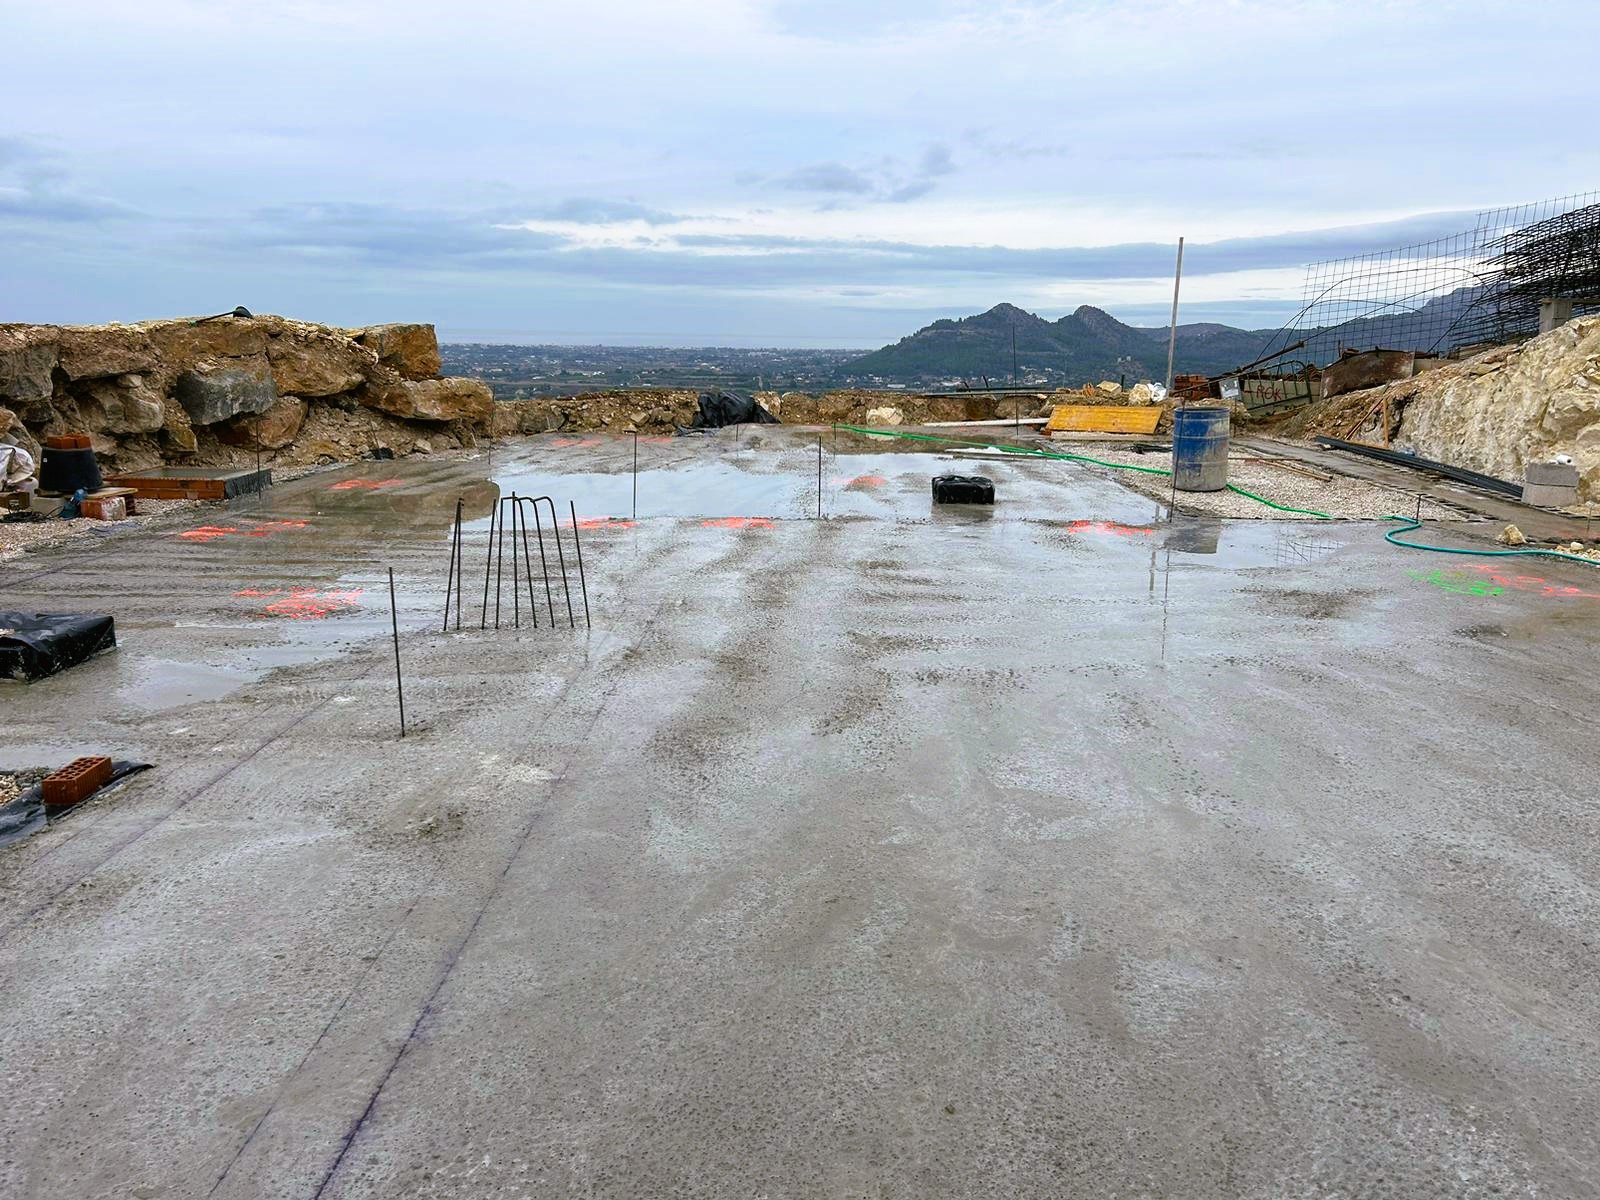 Project under construction in Monte Solana with views